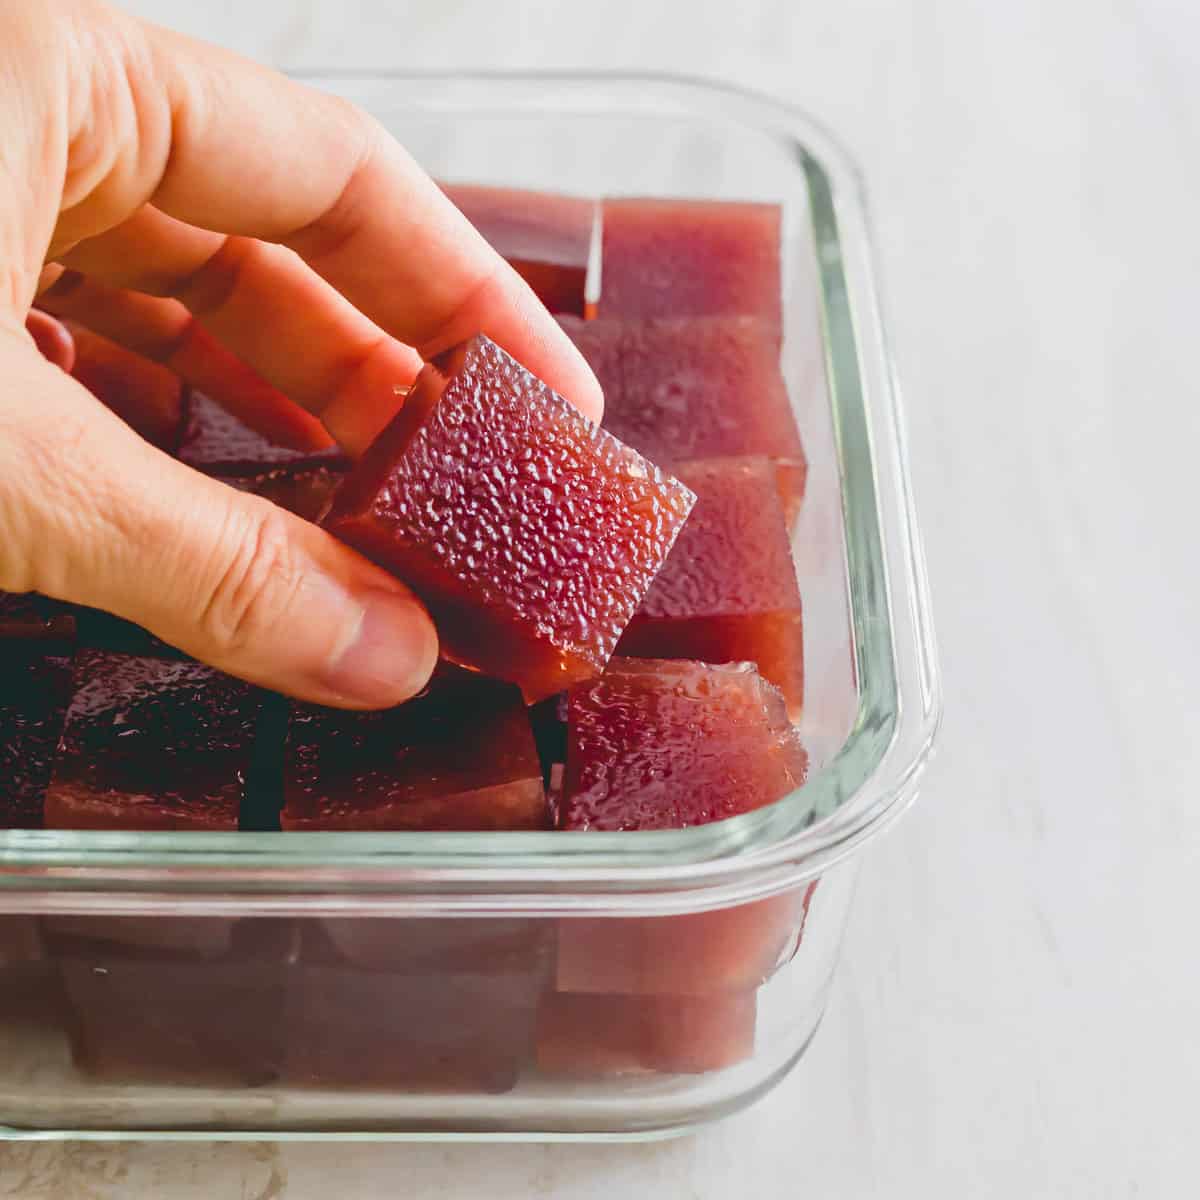 Tart cherry gelatin squares to help promote a restful and healthy night's sleep.